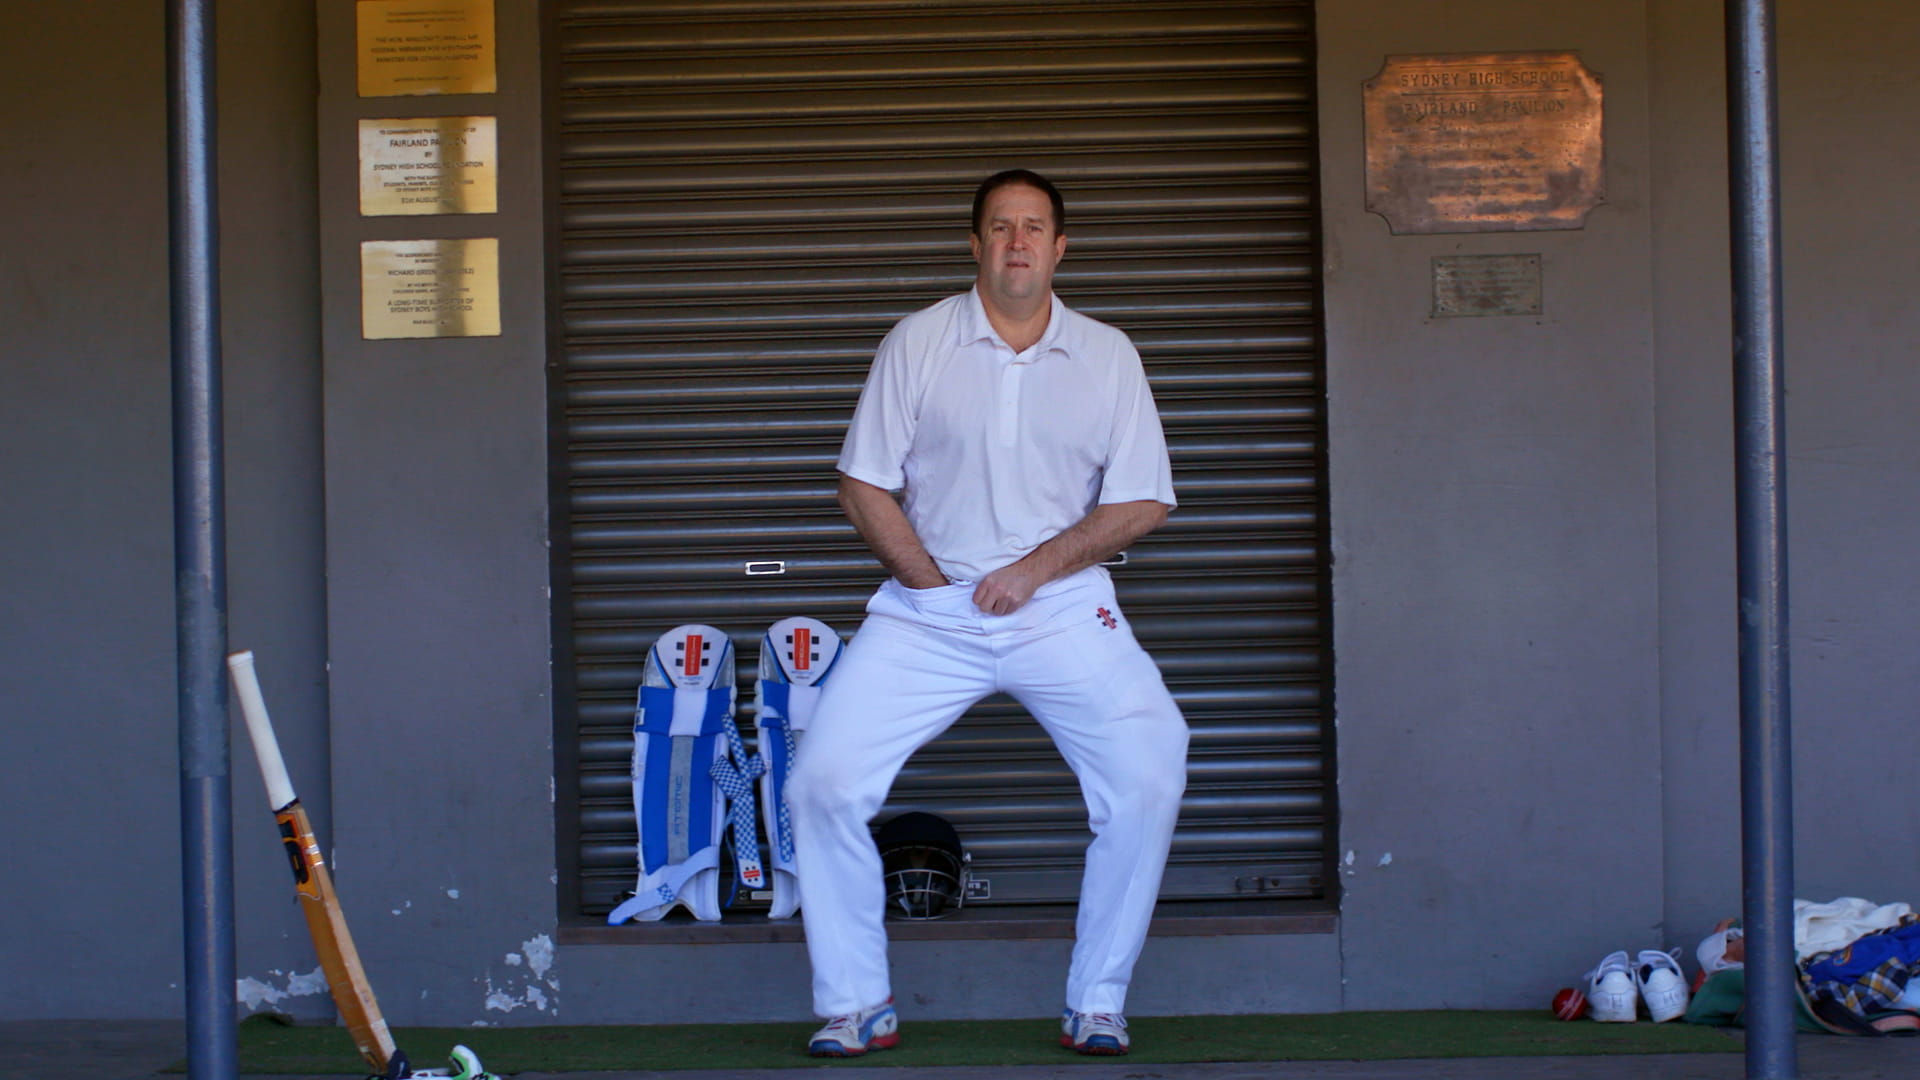 Male cricketer adjusting his box next to a Sydney Highschool plaque.